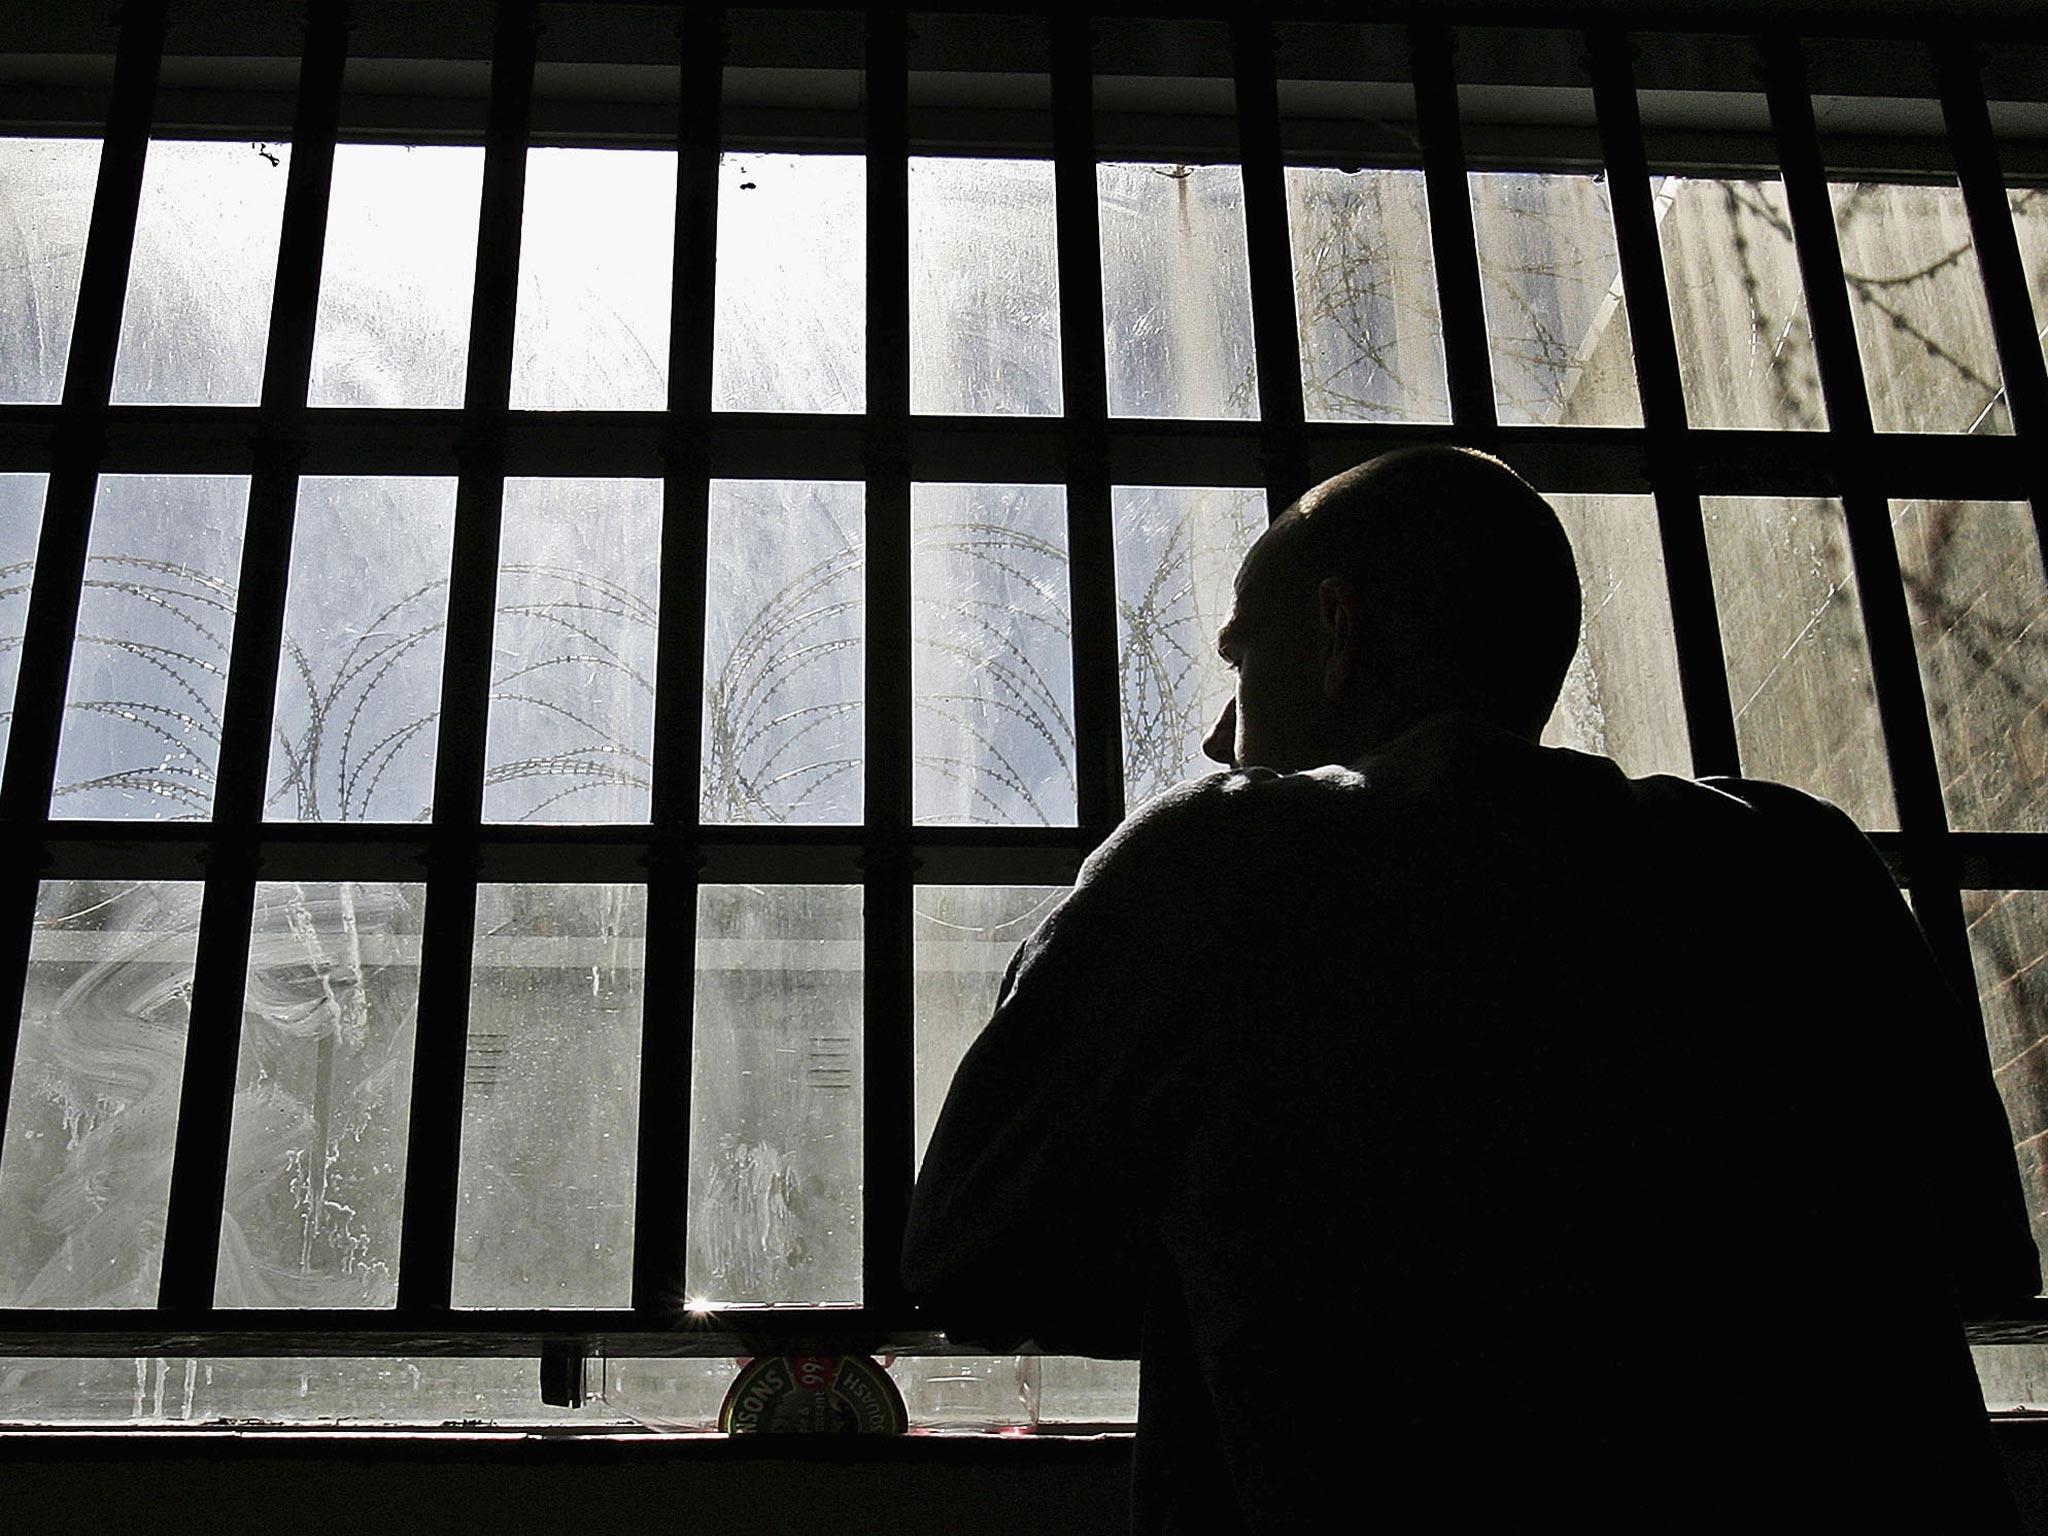 One in seven prisoners (14 per cent) in England and Wales is a Muslim, according to figures from the Ministry of Justice